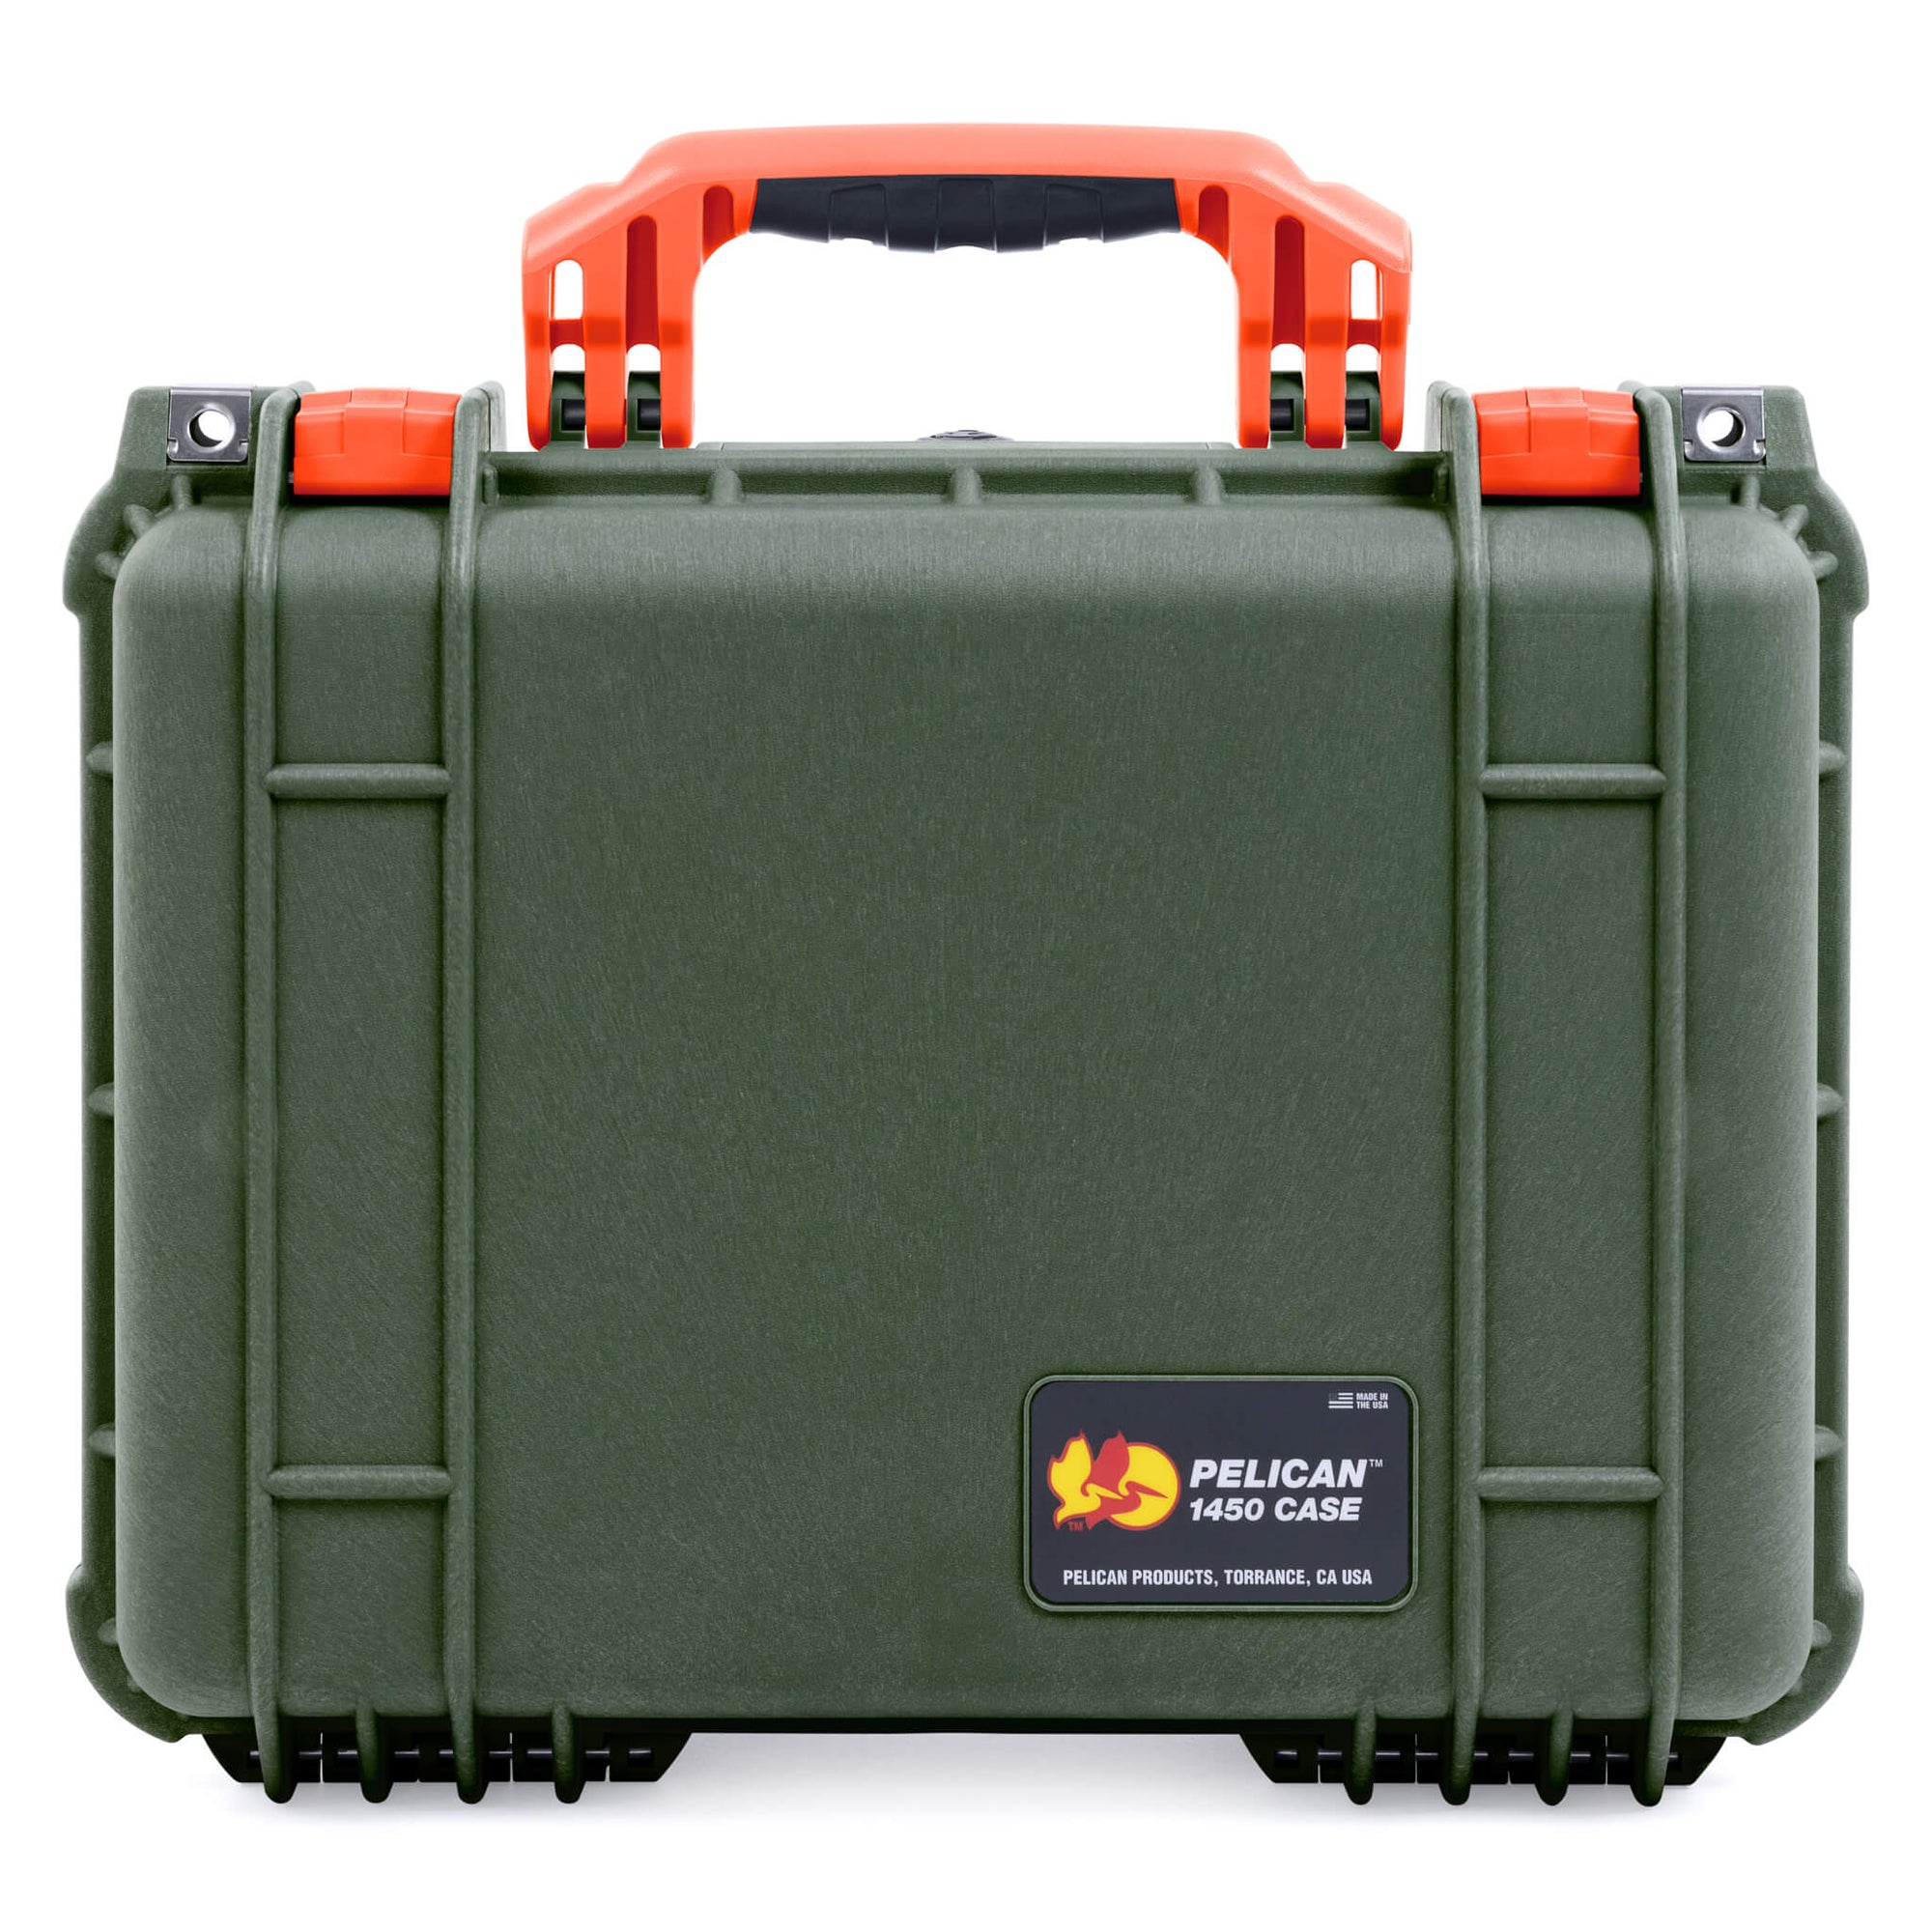 Pelican 1450 Case, OD Green with Orange Handle & Latches ColorCase 